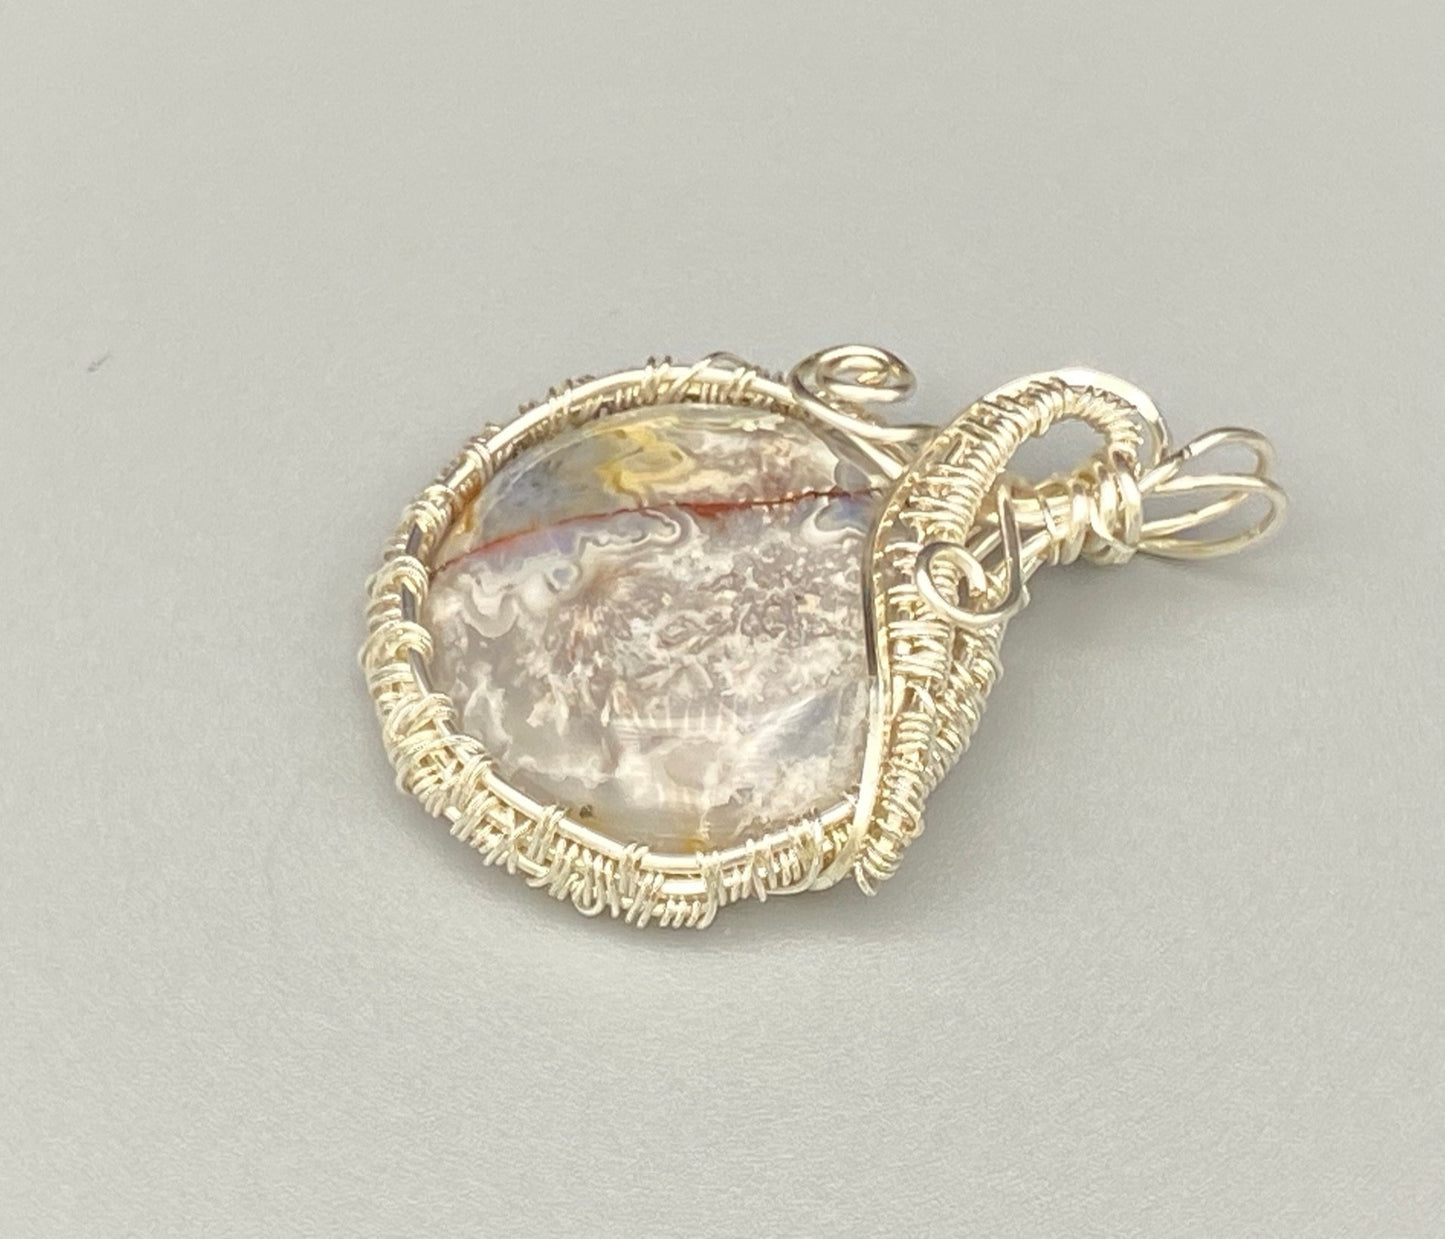 Silversmith Crazy Lace Round Agate Wire Wrapped and Woven Pendant